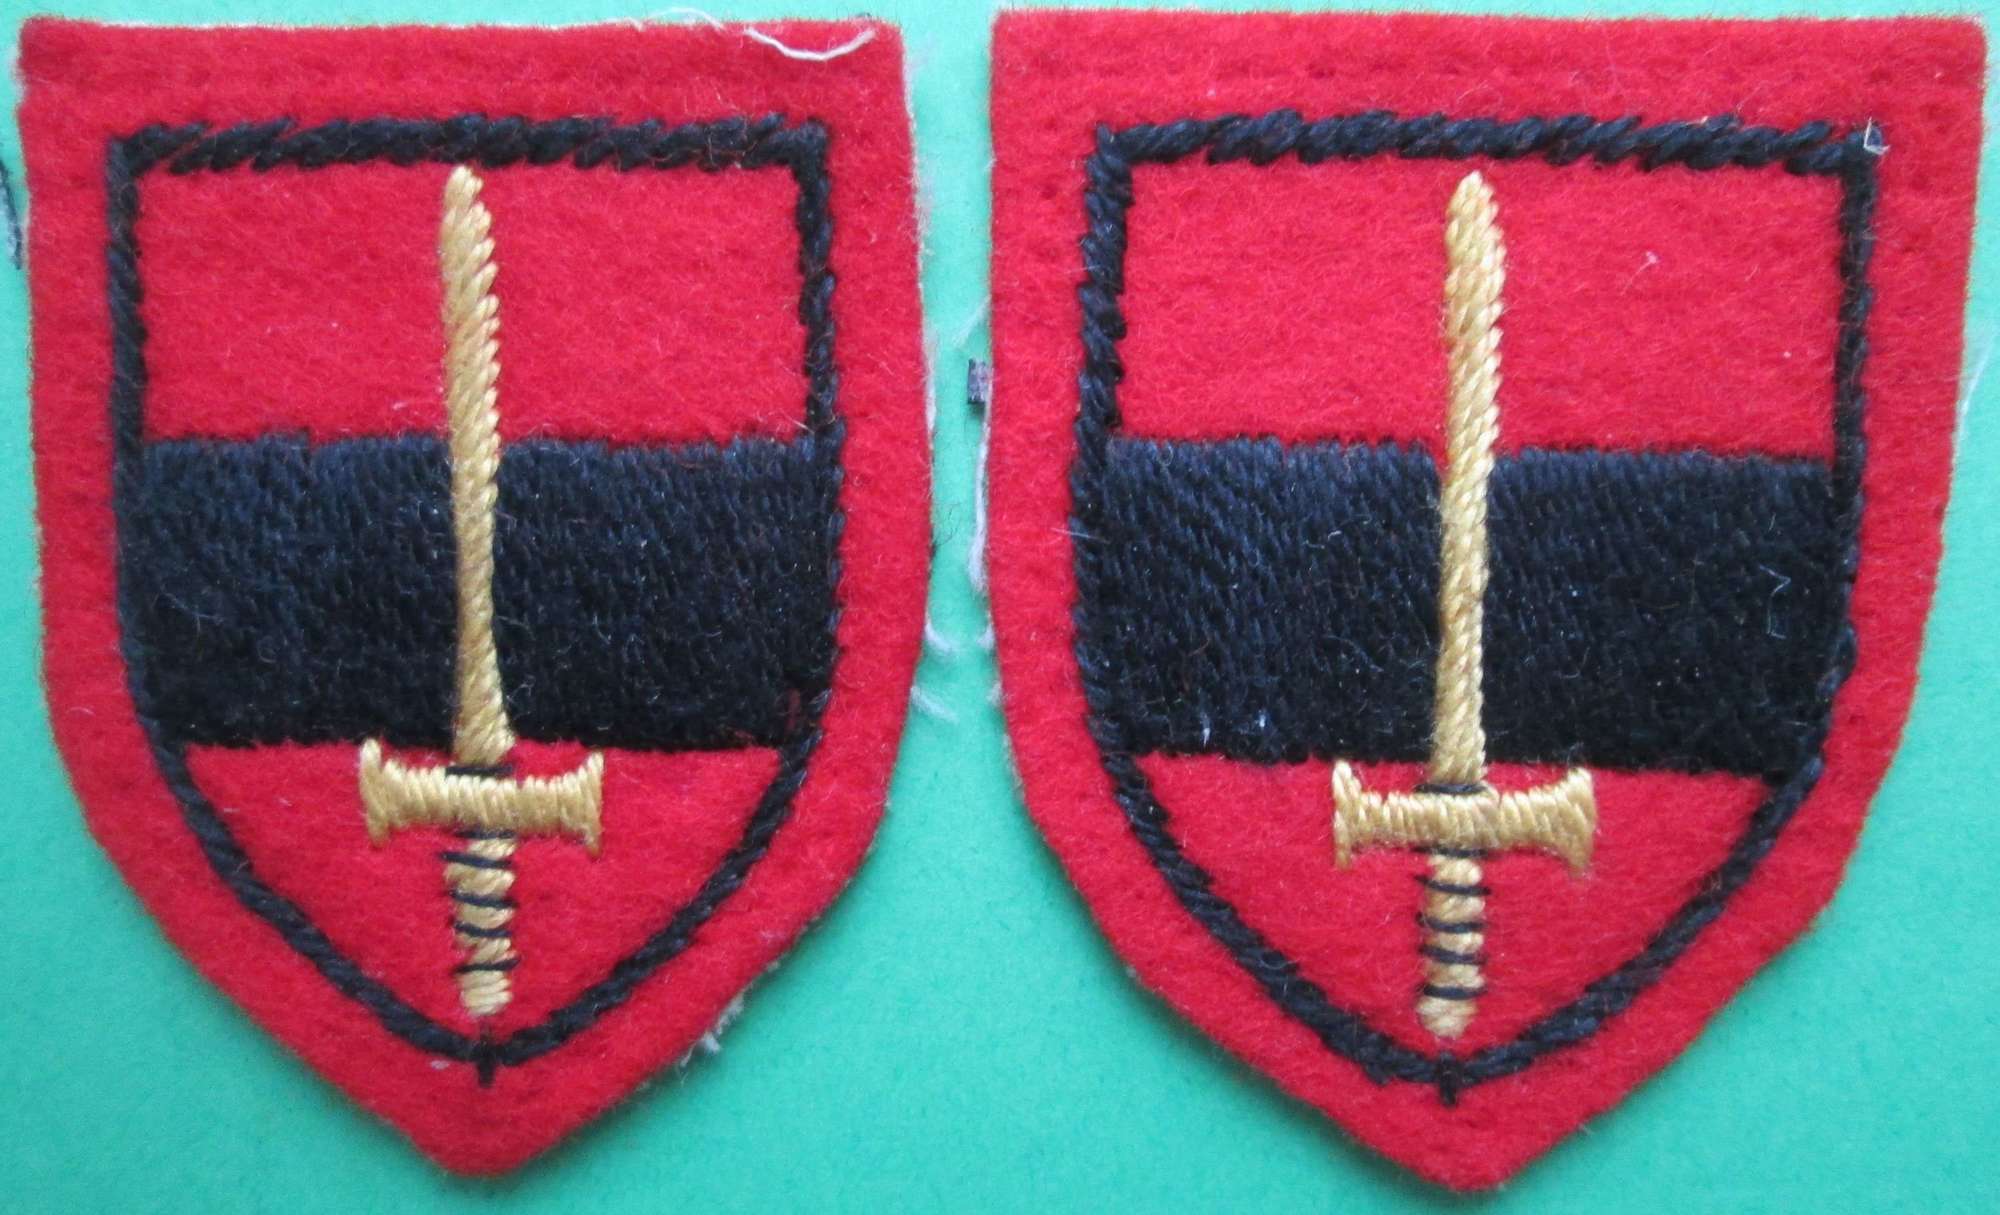 A PAIR OF TERRITORIAL ARMY TROOPS FORMATION SIGNS